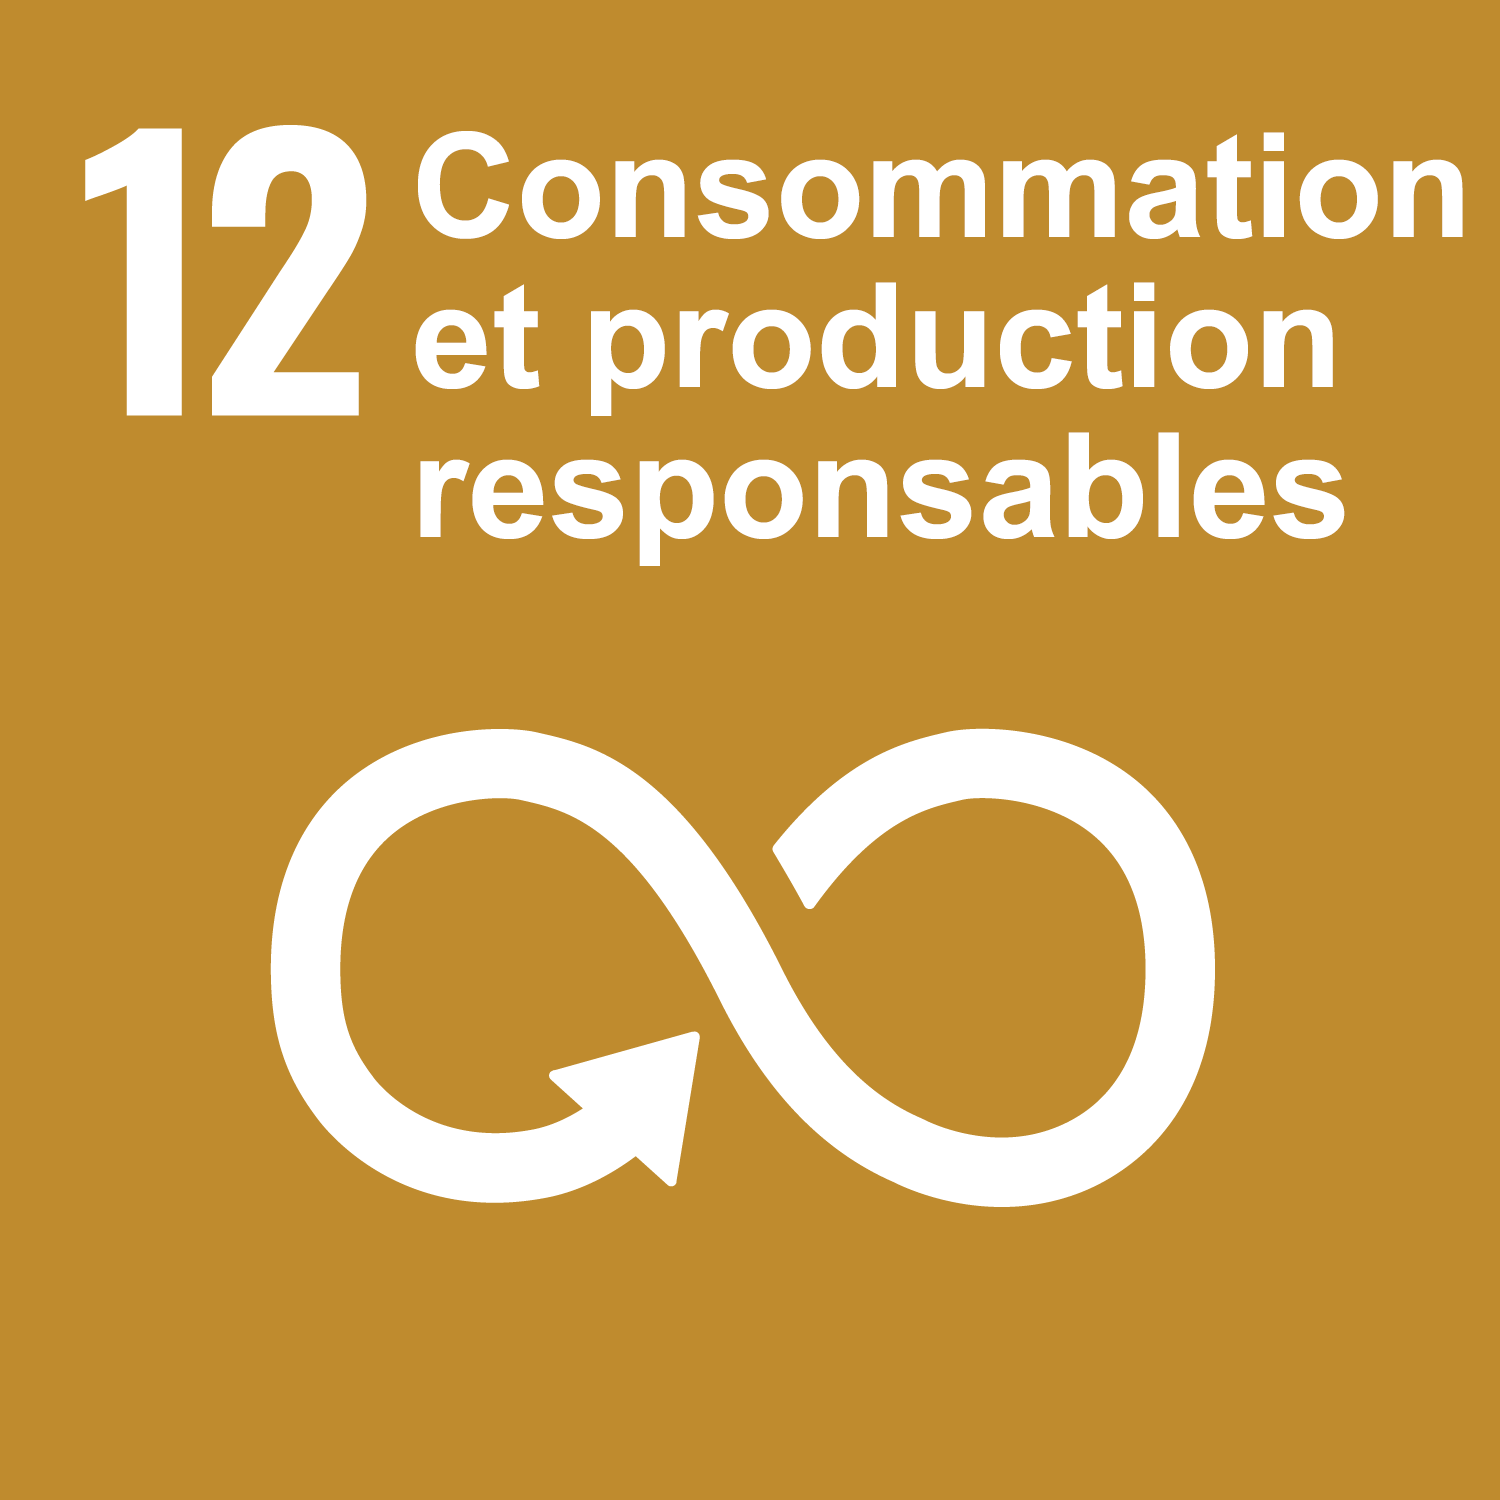 Goal 12: Responsible consumption and production 